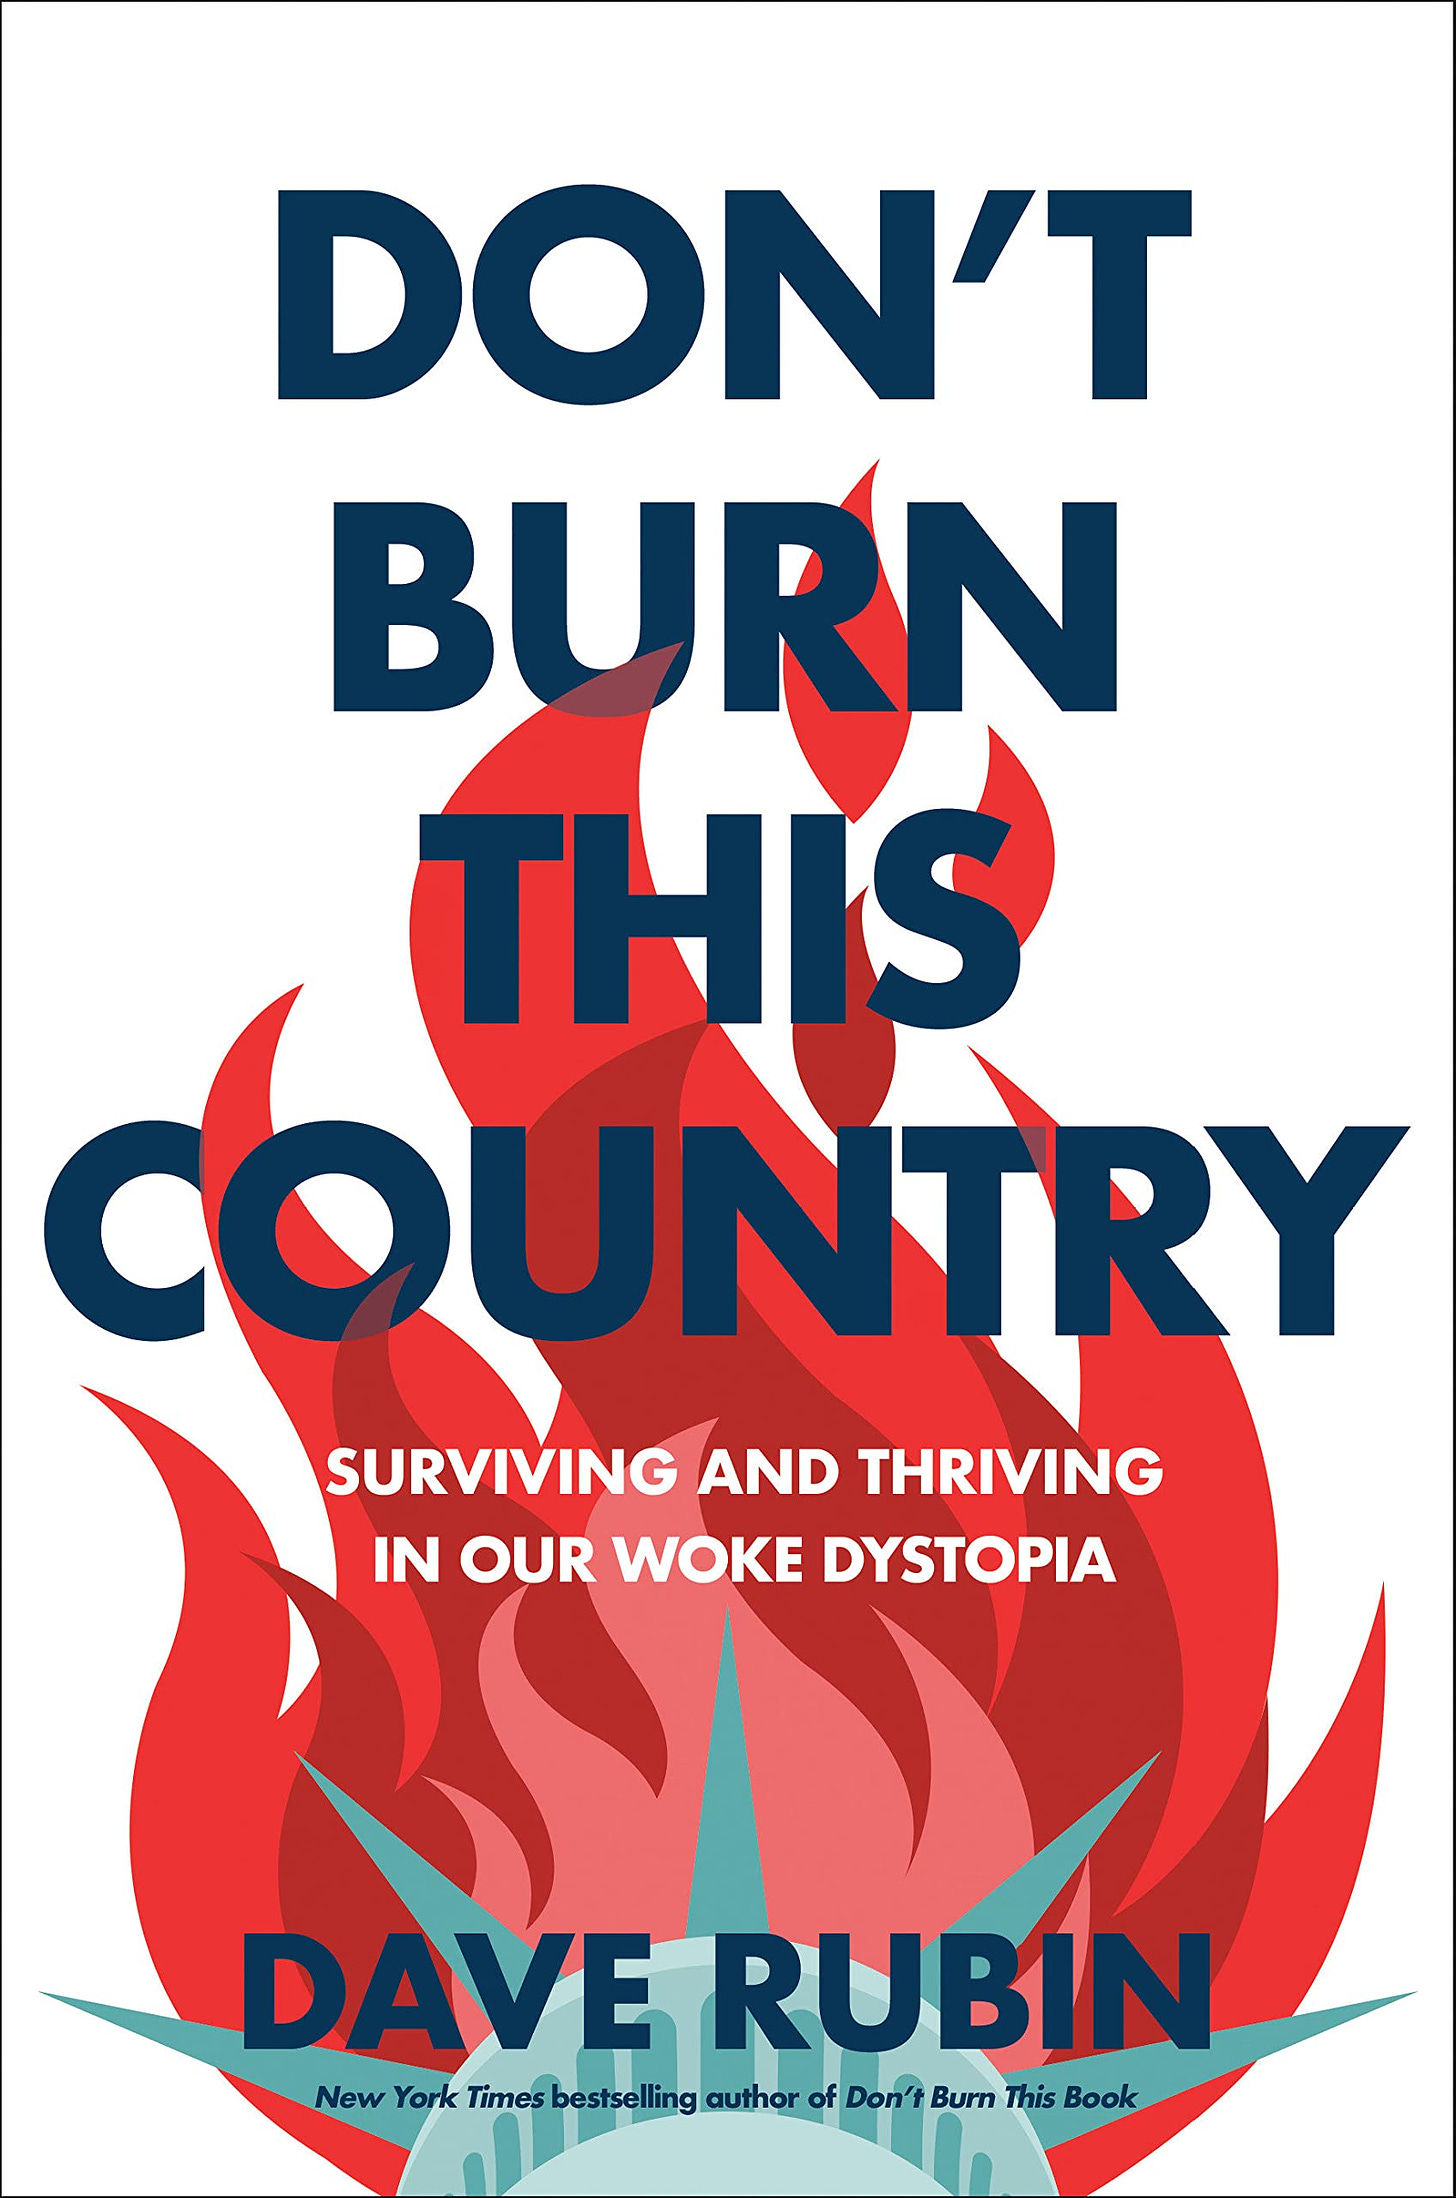 Amazon.com: Don't Burn This Country: Surviving and Thriving in Our Woke  Dystopia: 9780593332146: Rubin, Dave: Books